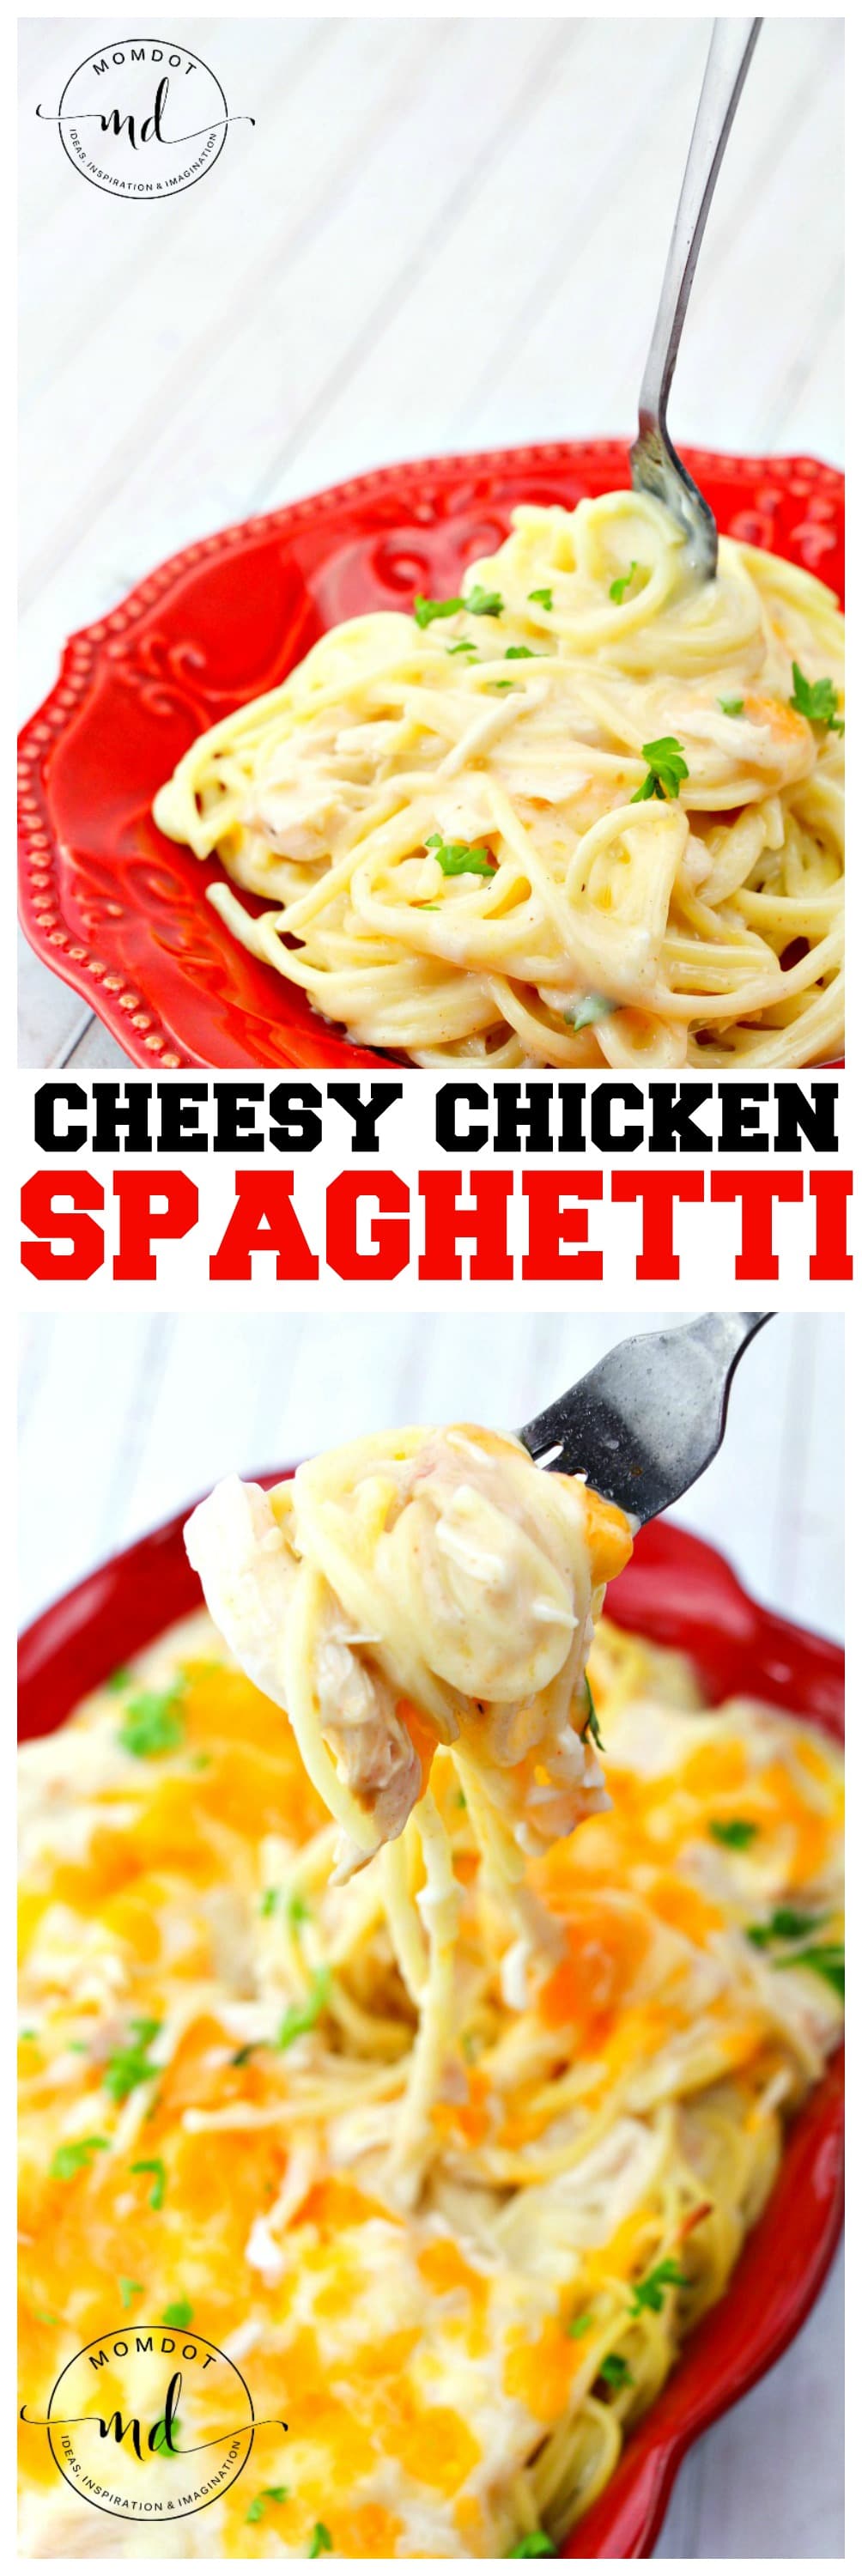 Cheesy Chicken Spaghetti Cake Recipe : Ooey gooey creamy cheese in a baked meal the whole family will want seconds